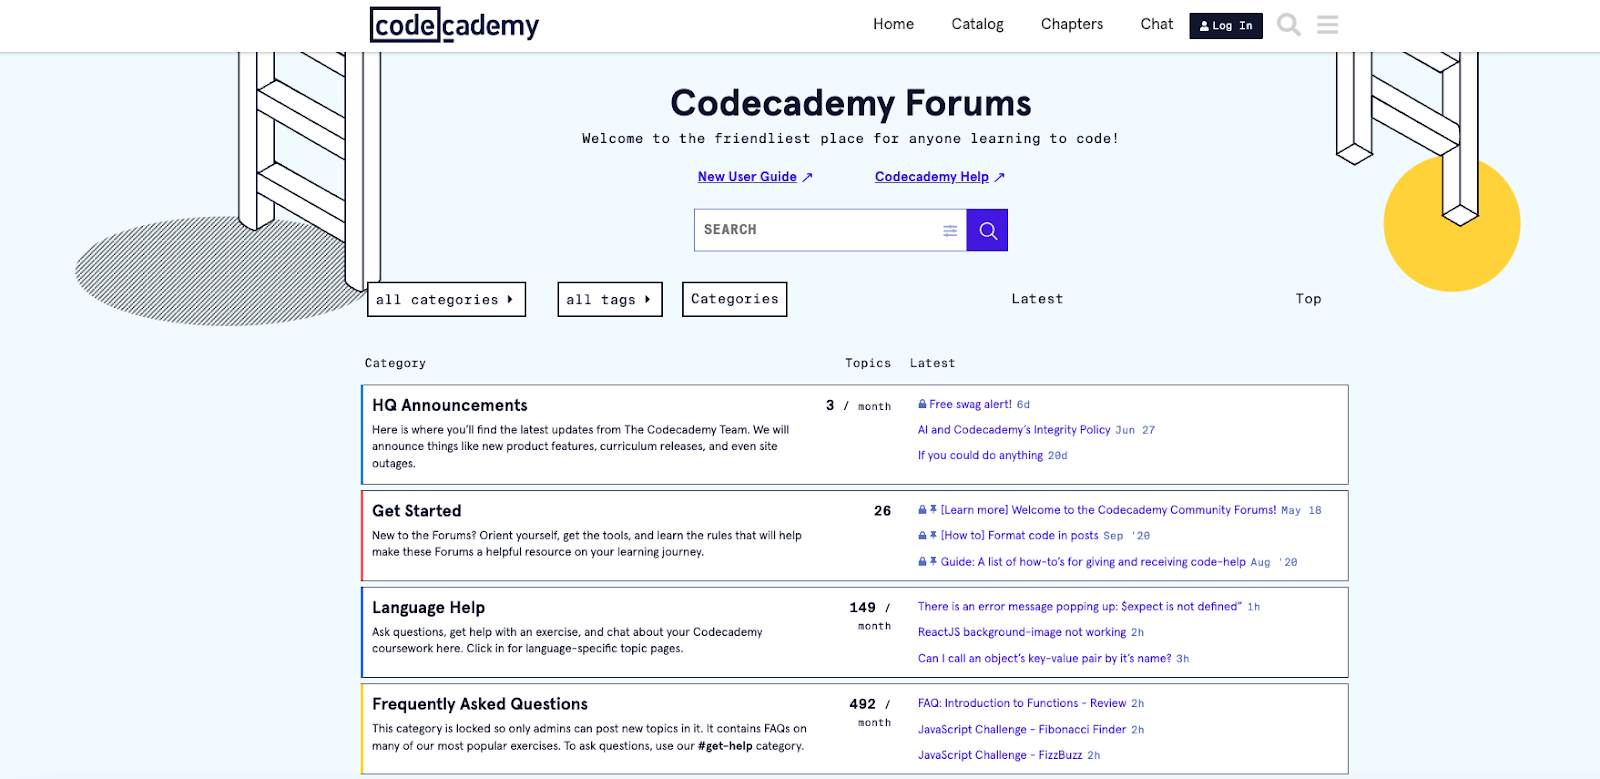 Codecademy forums page organized by category, topic, and release